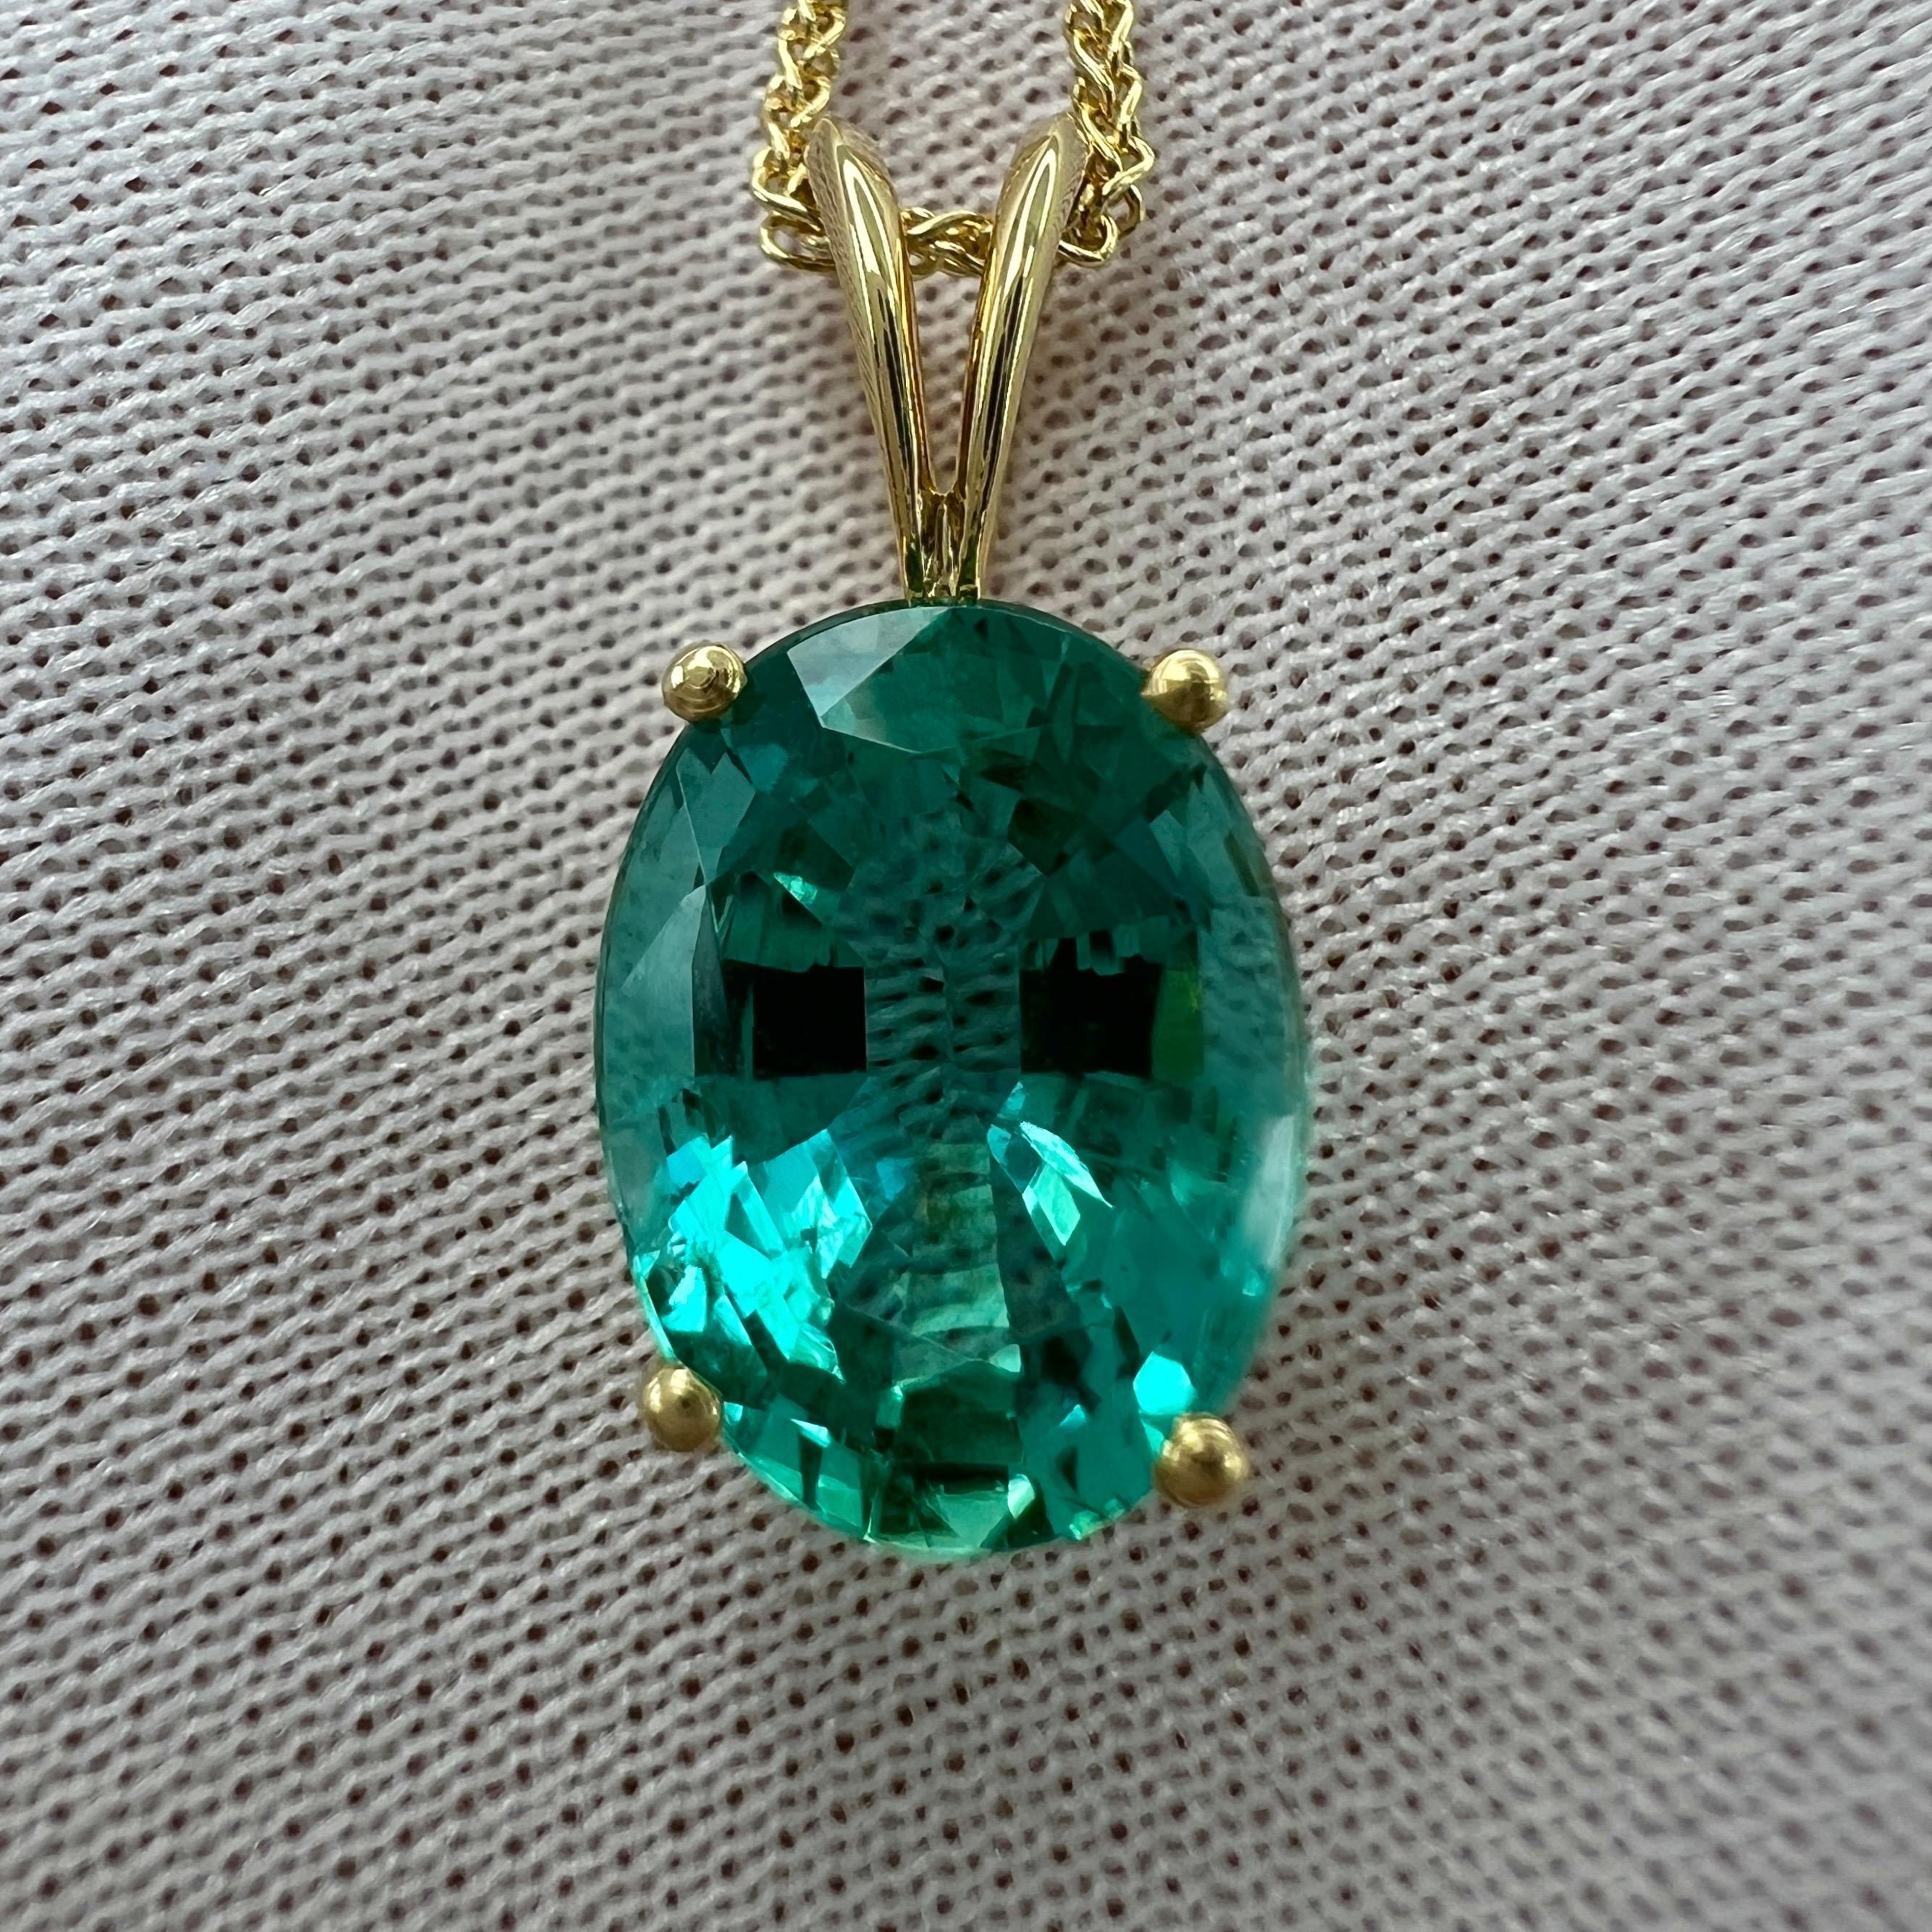 GIA Certified 2.95ct Vivid Blue Green Oval Cut Emerald 18k Gold Pendant Necklace For Sale 6